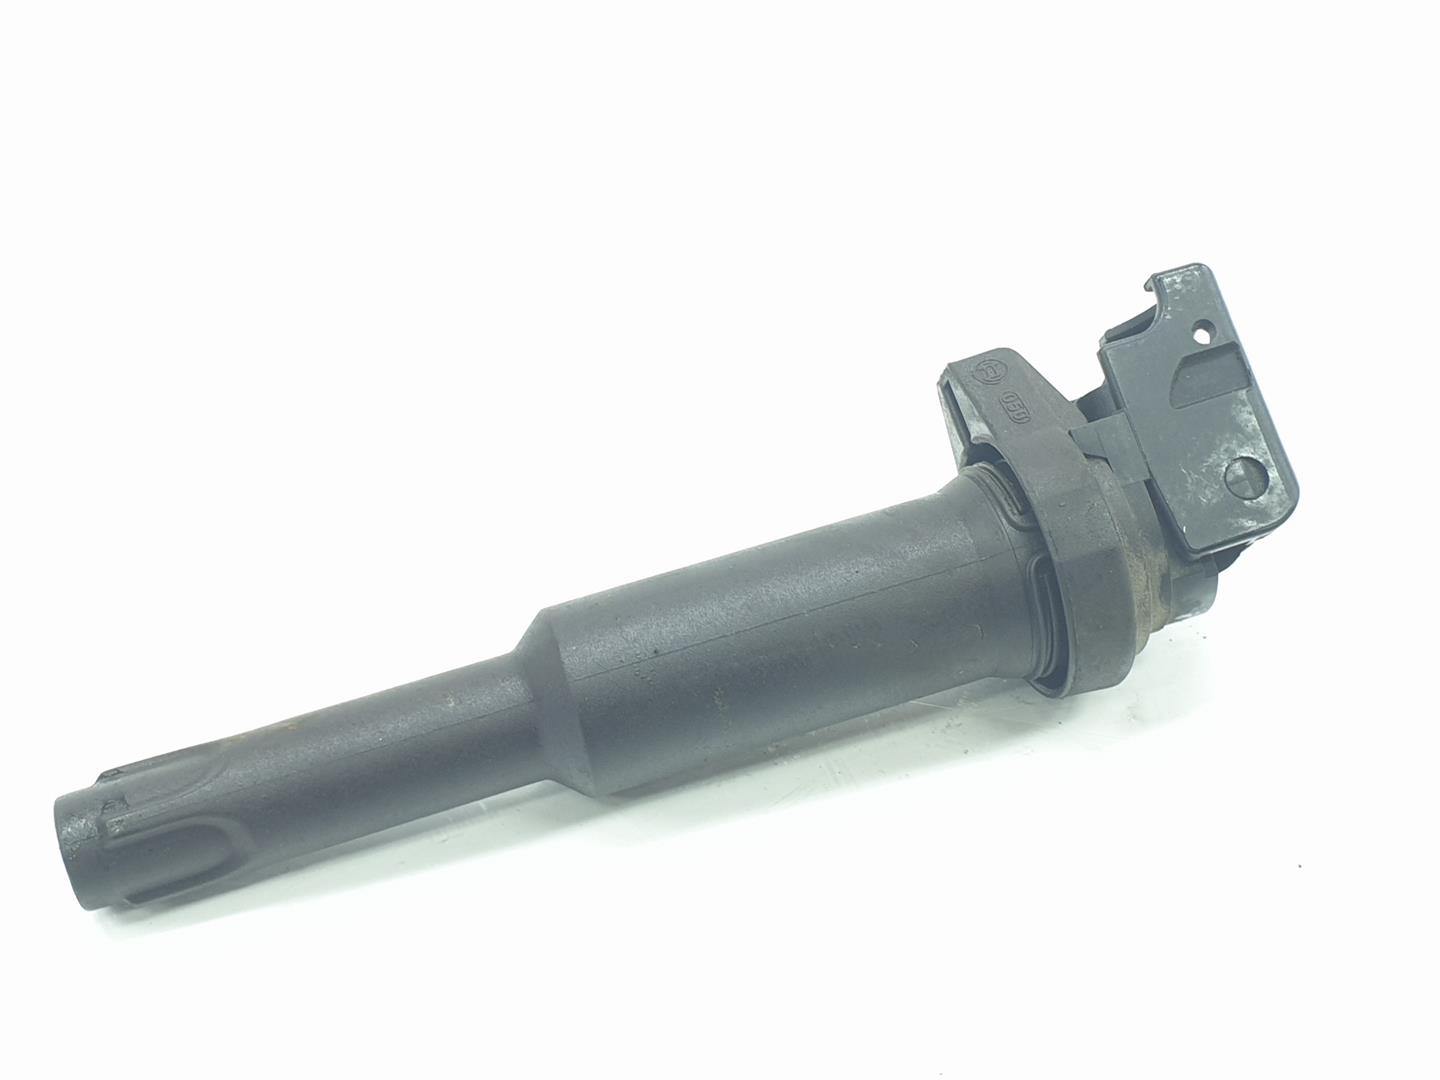 BMW 6 Series E63/E64 (2003-2010) High Voltage Ignition Coil 7548553, 7548553, 1111AA 24700111